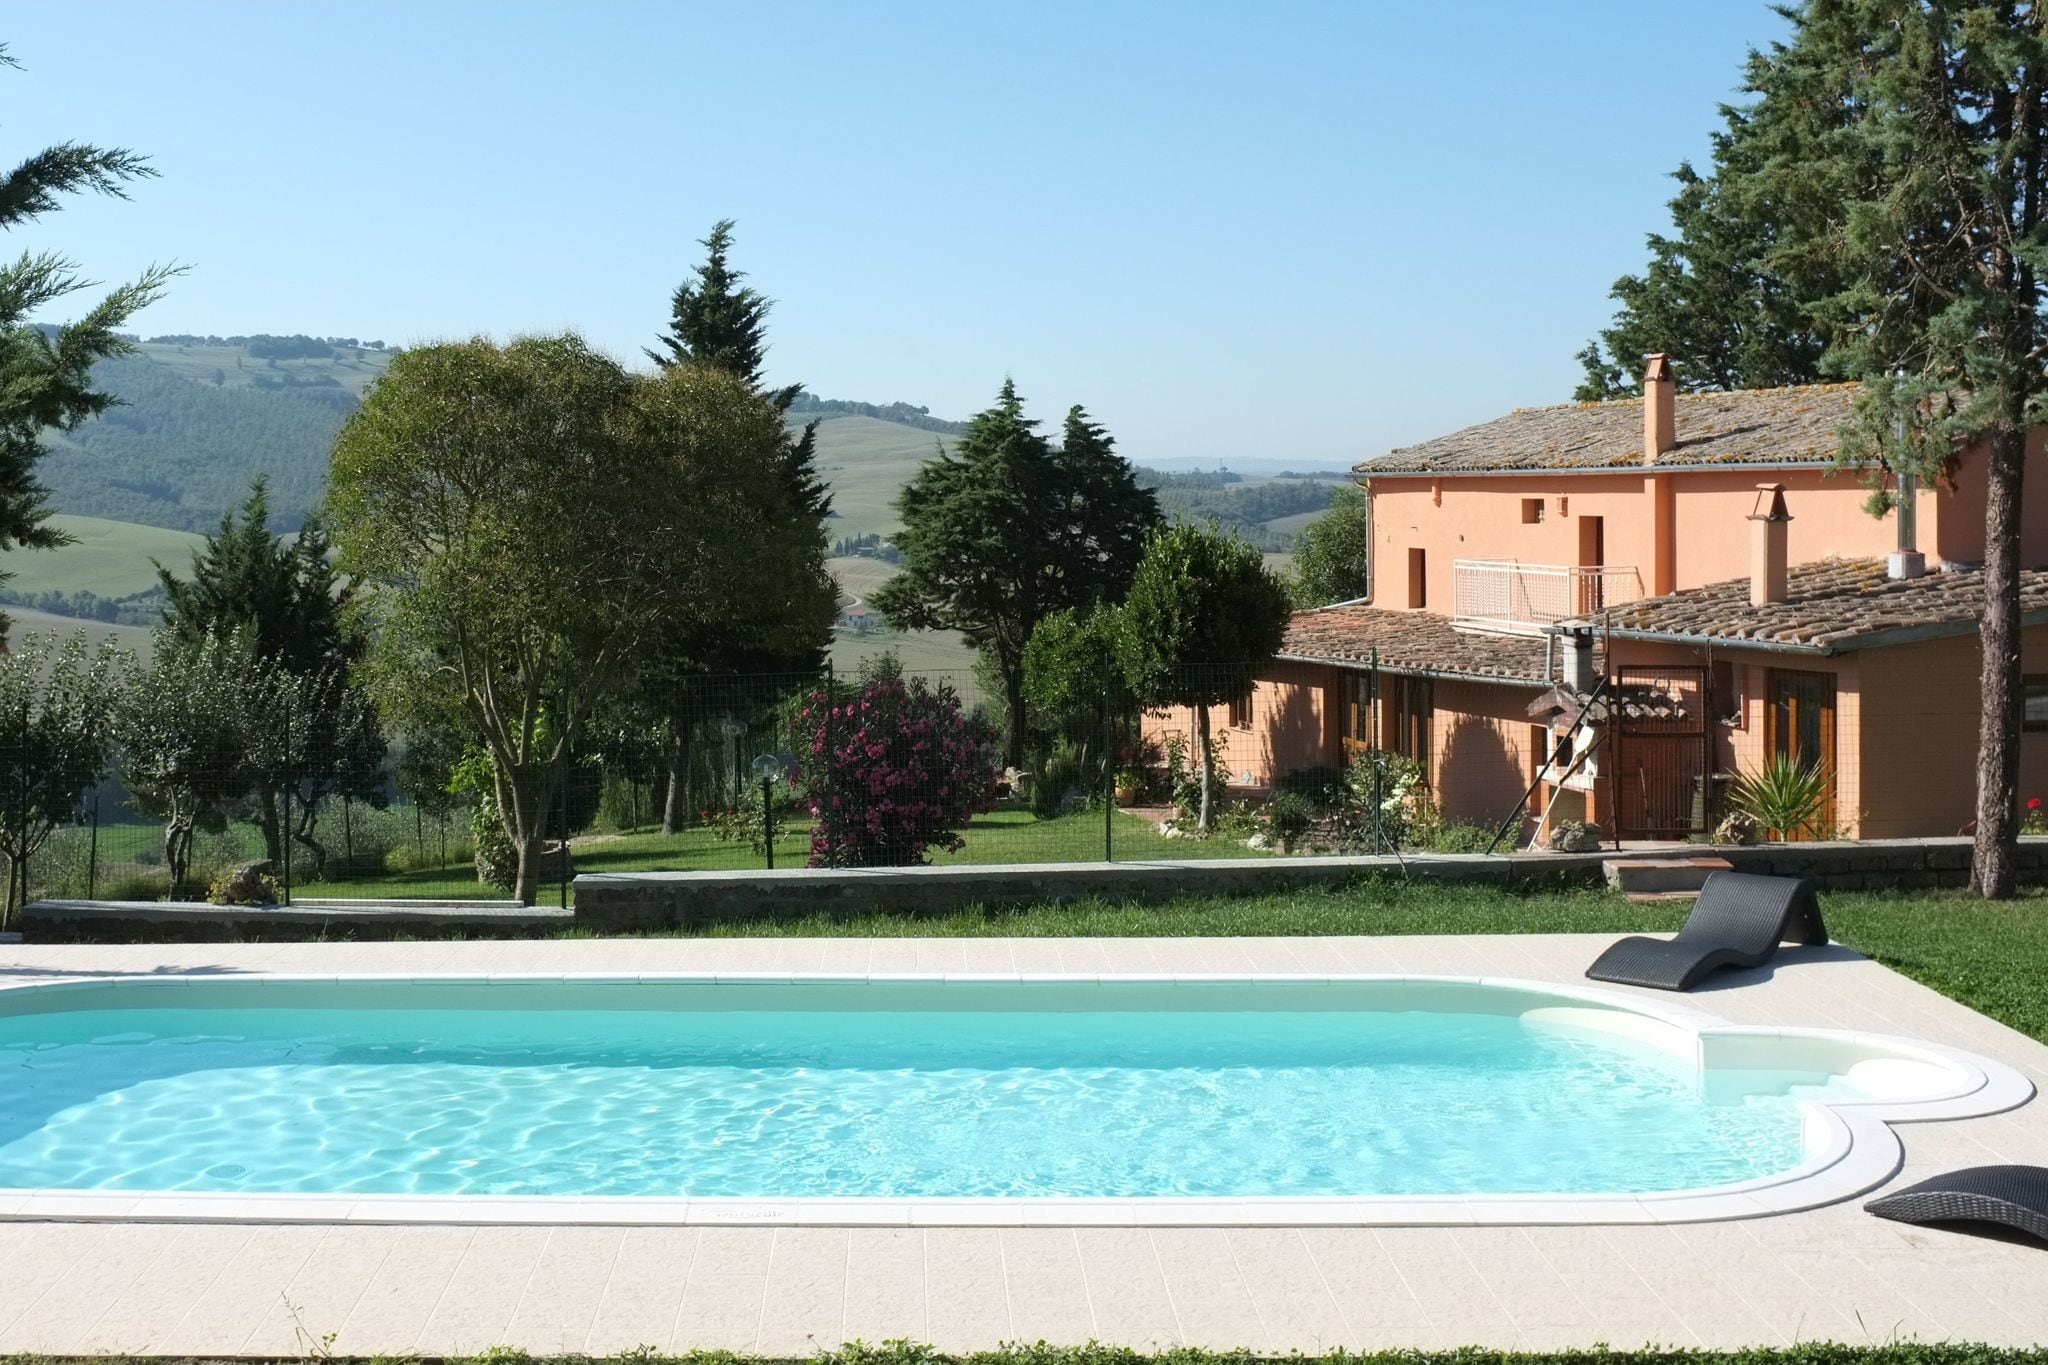 Apartment in a farmhouse in the beautiful Val d'Orcia